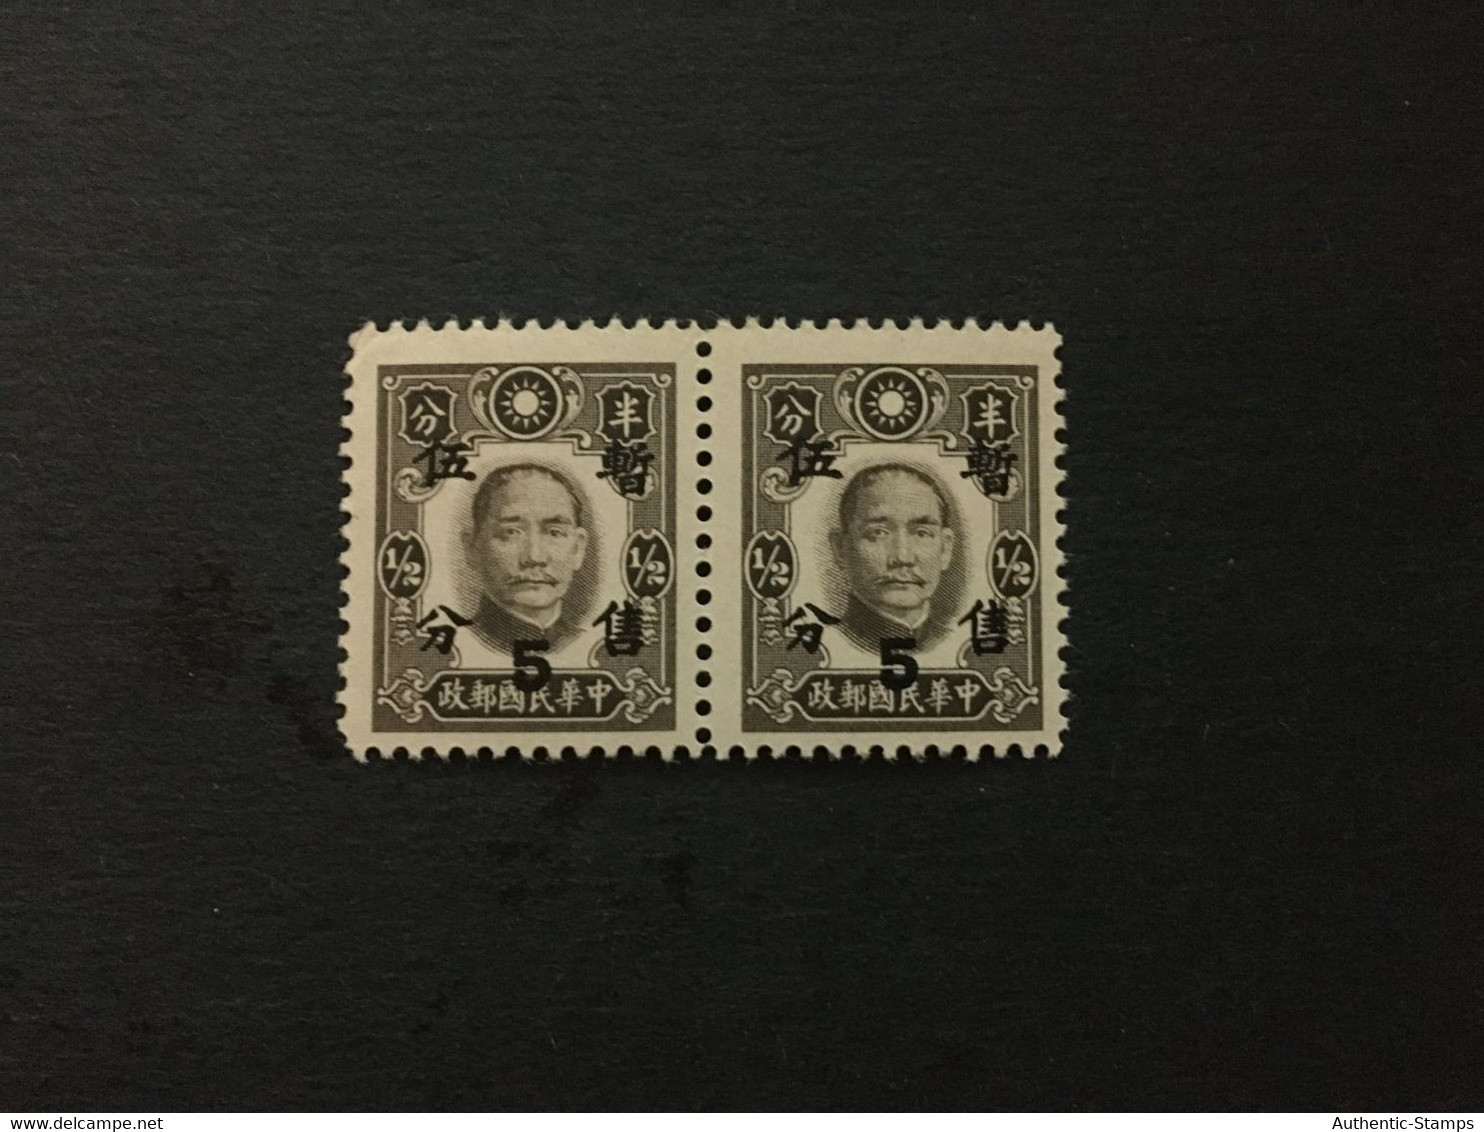 CHINA  STAMP BLOCK, MNH, JAPANESE OCCUPATION,Overprinted With “Temporarity Sold For”and Surcharged，CINA,CHINE,LIST 310 - 1943-45 Shanghai & Nankin